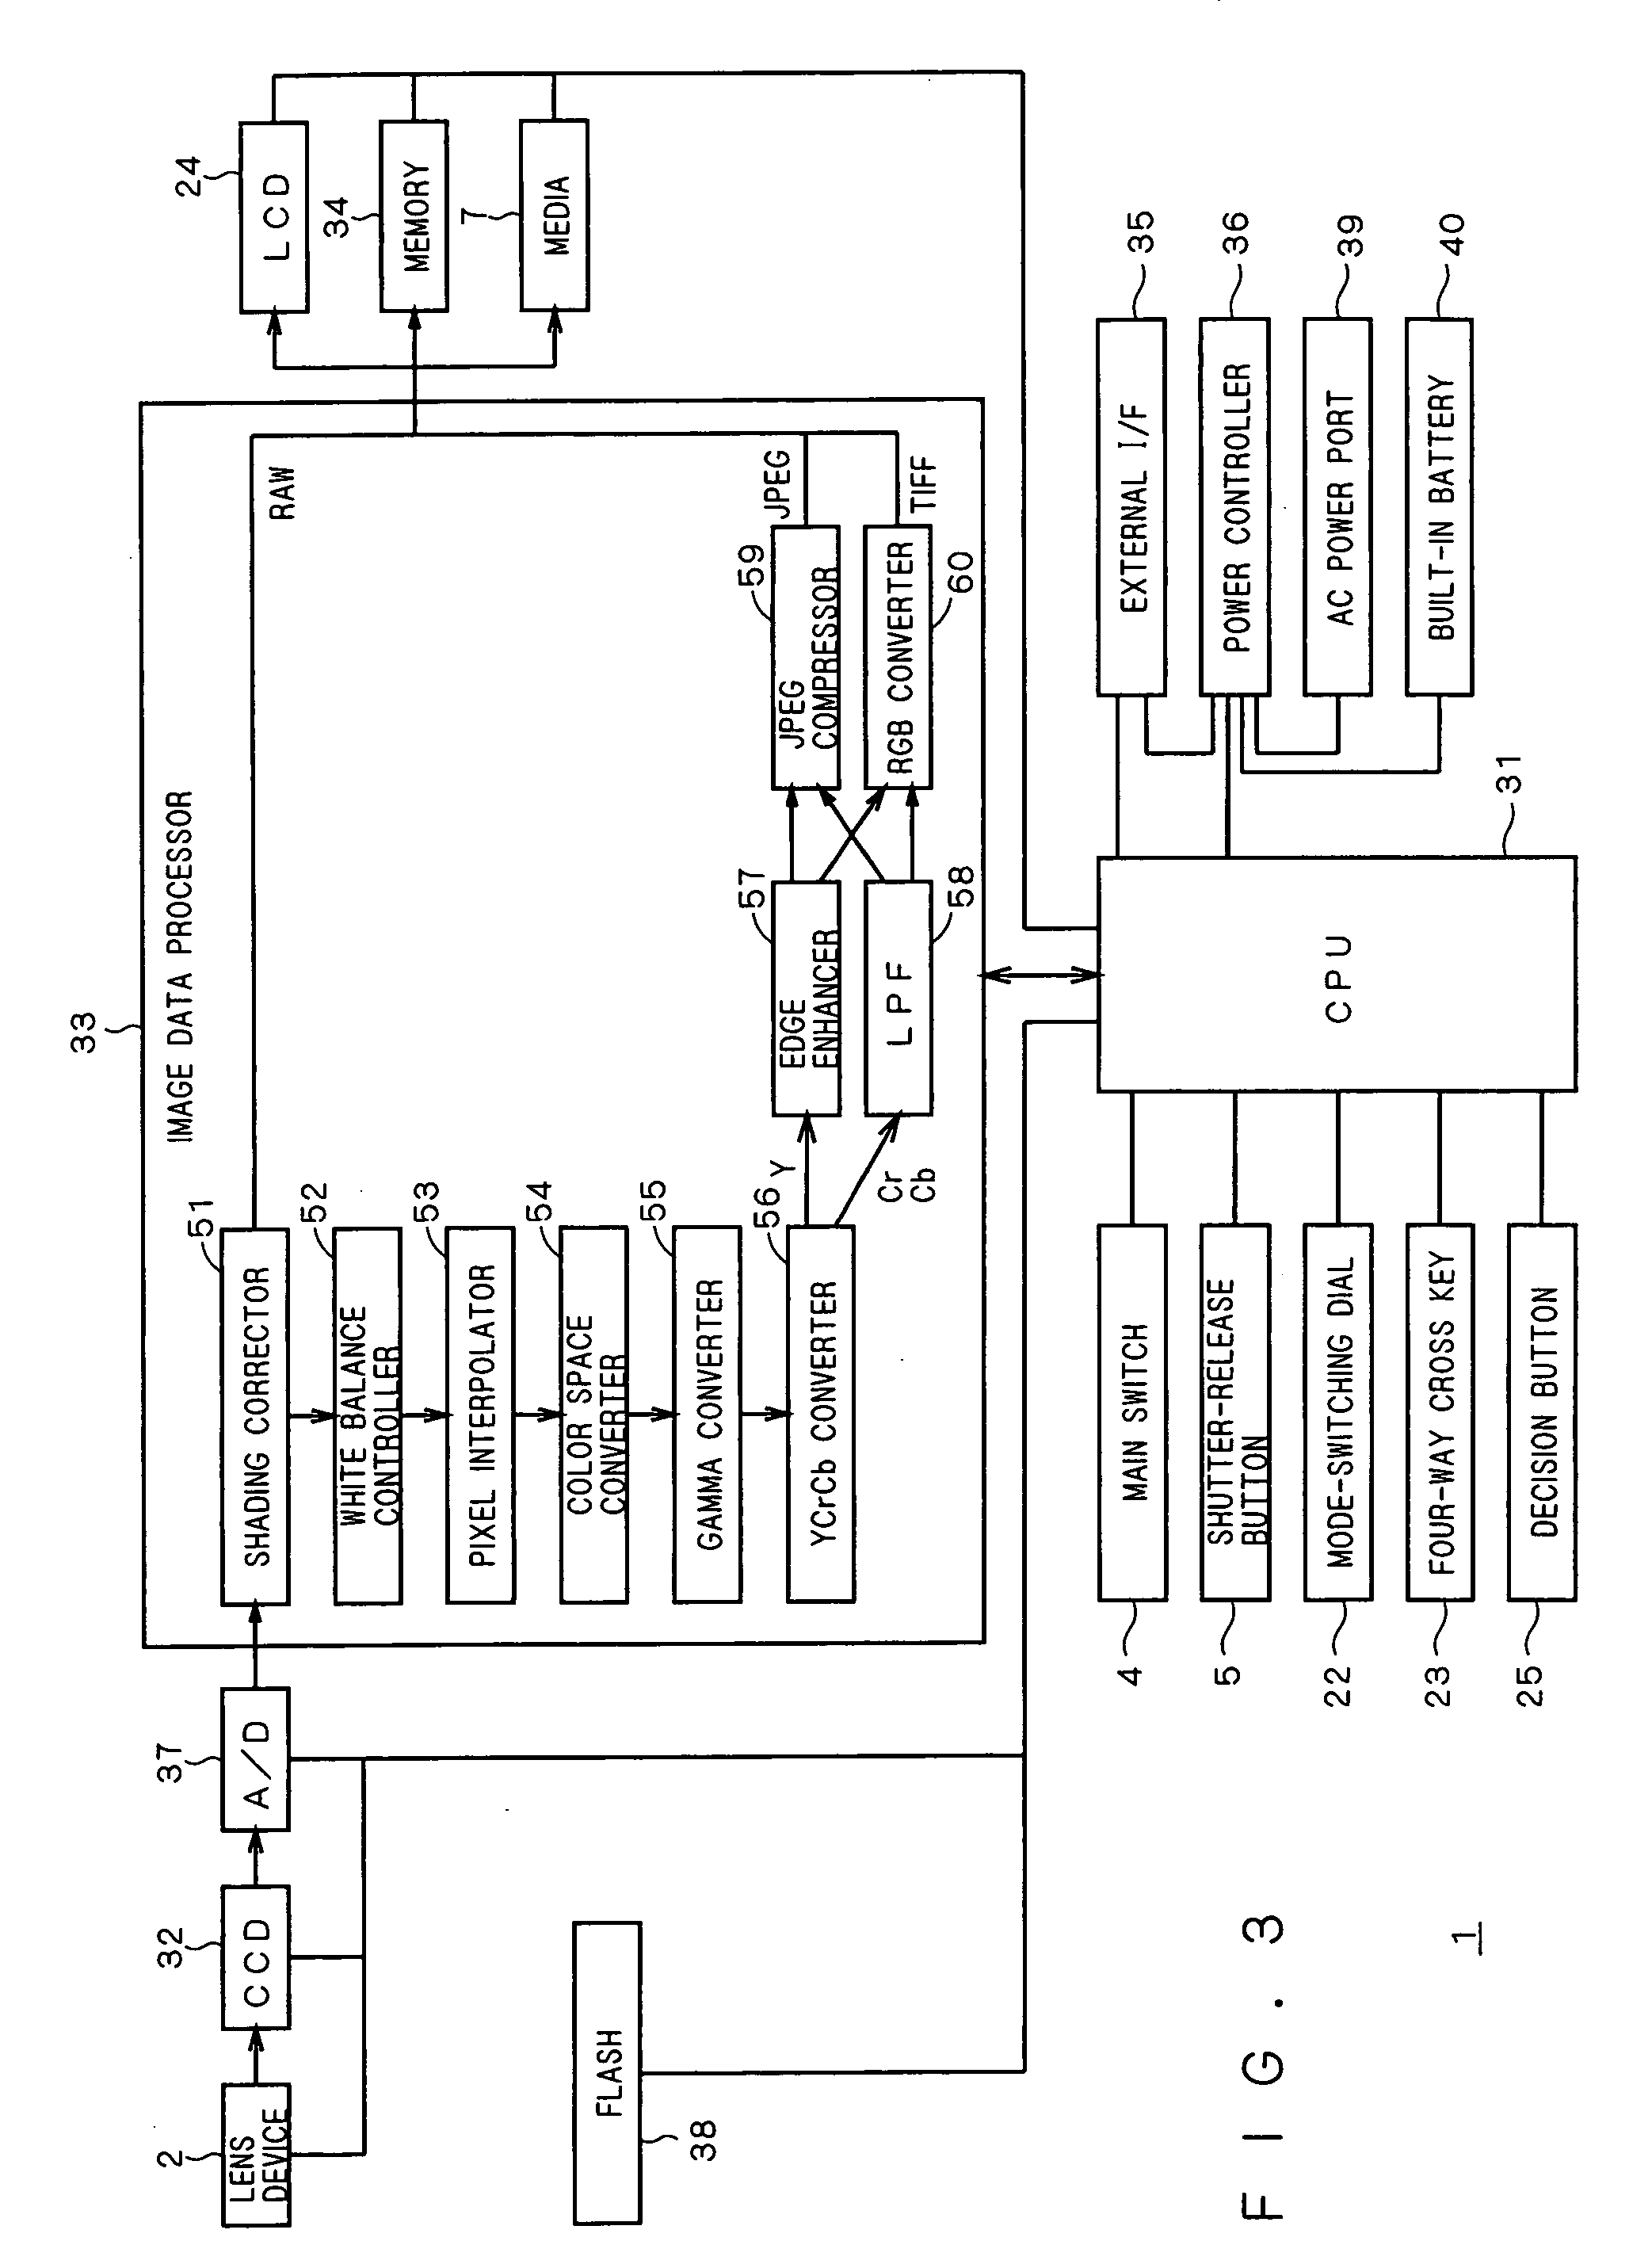 Image capturing apparatus, electronic processing terminal and image processing system